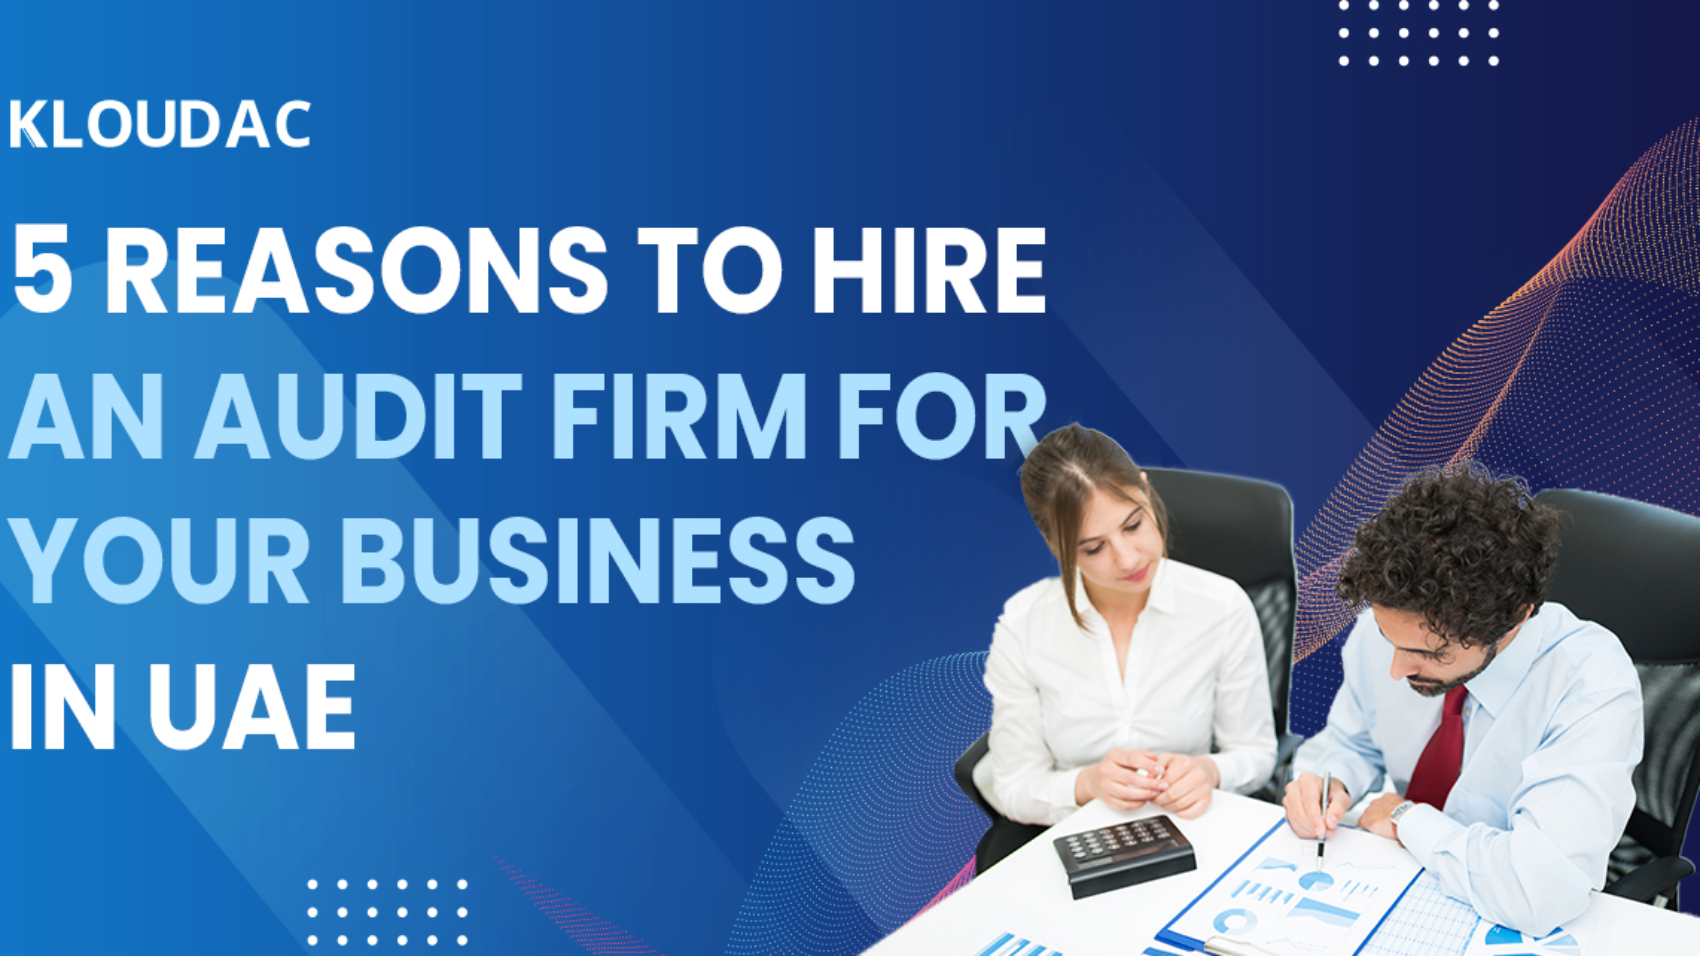 5 reasons to hire an Audit Firm for your business in UAE